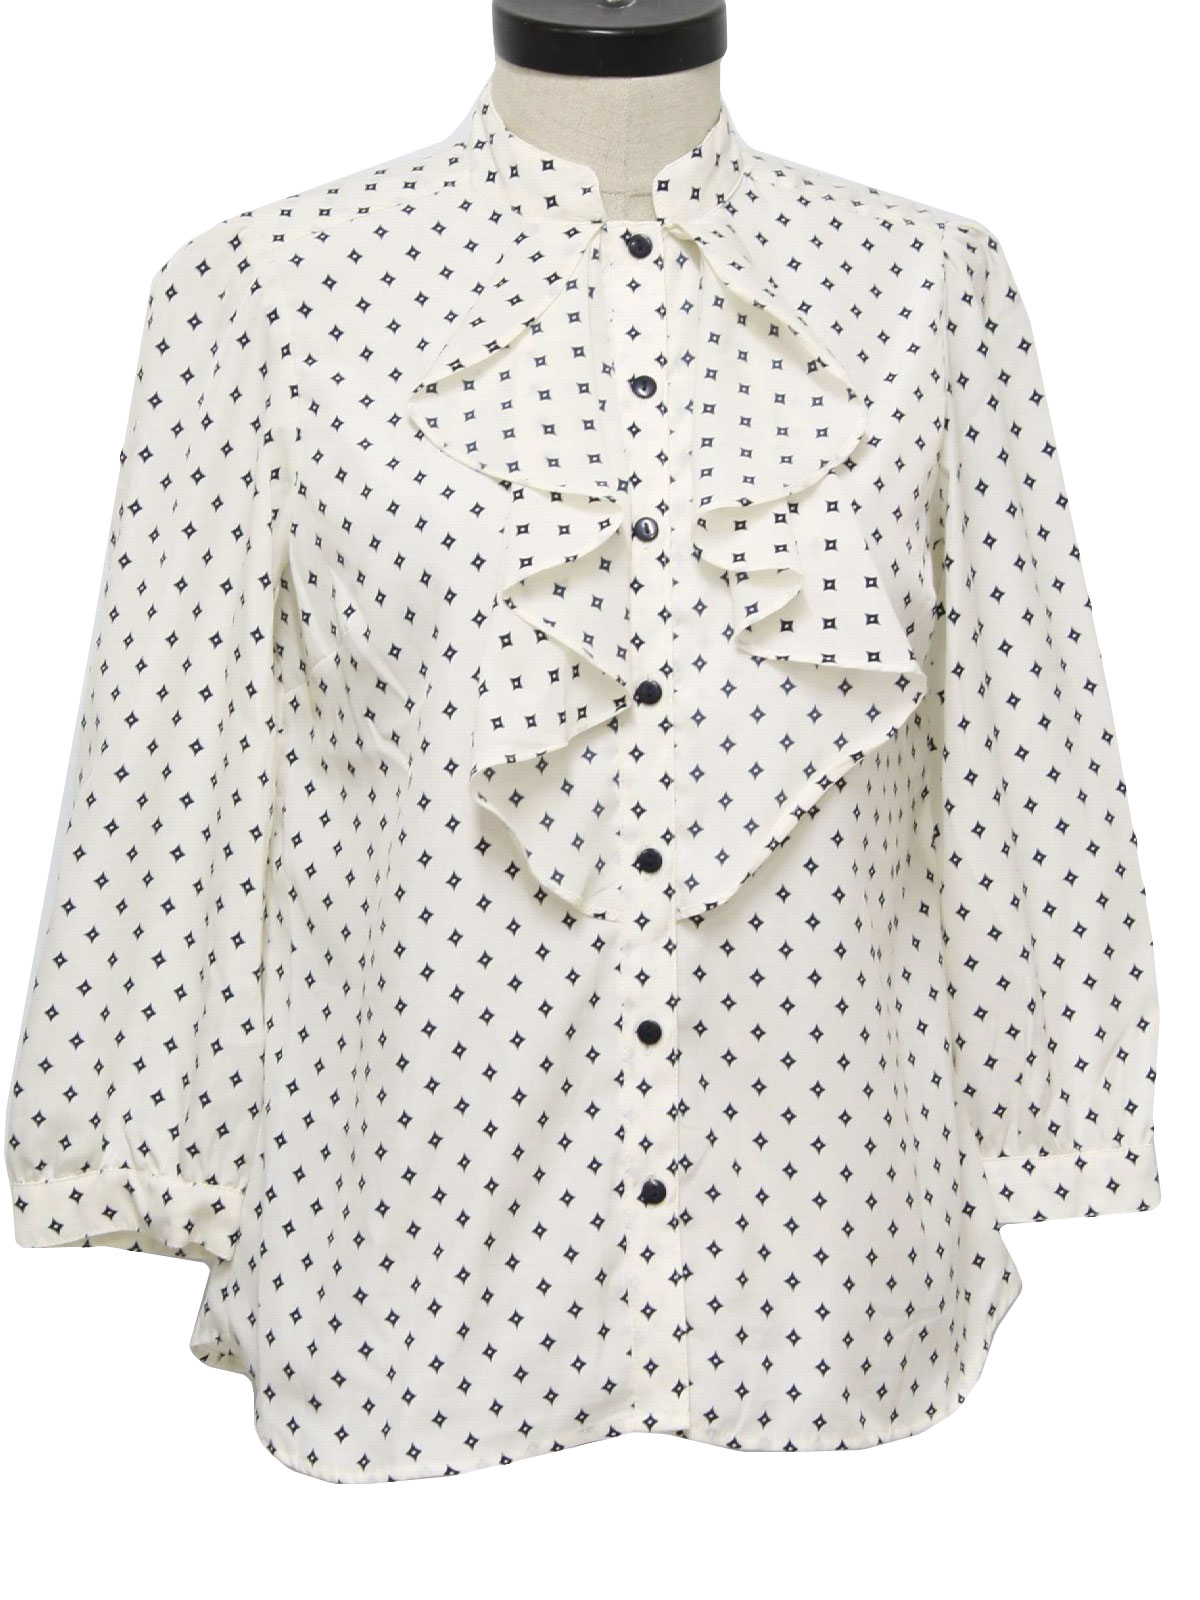 90s Shirt (George): 90s -George- Womens cream and black silky polyester ...